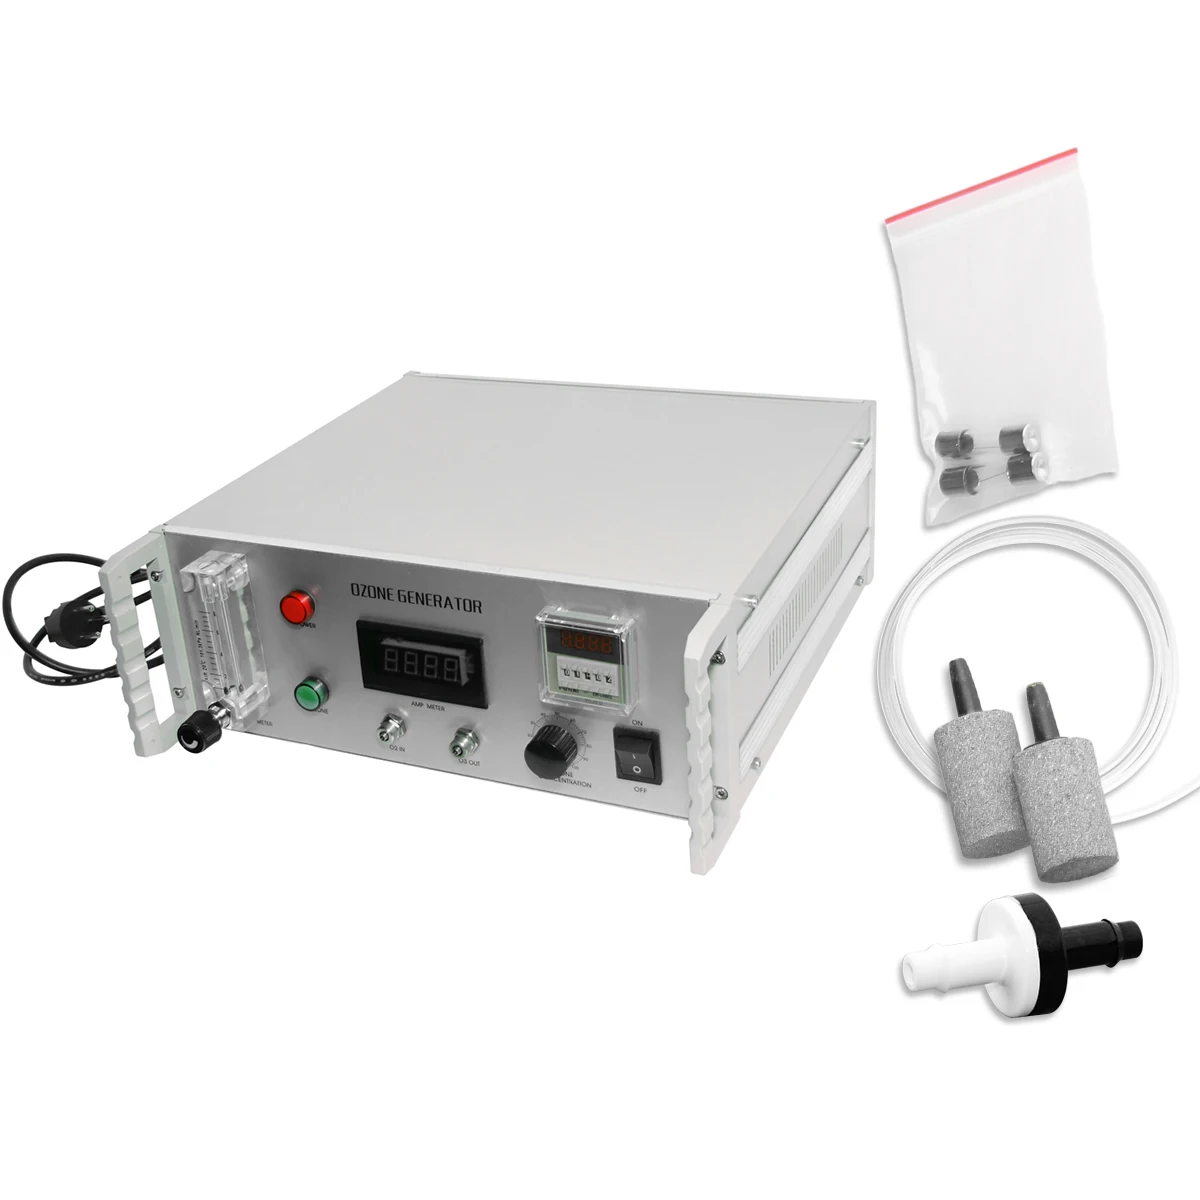 Medical ozone machine for hospitals and laboratories